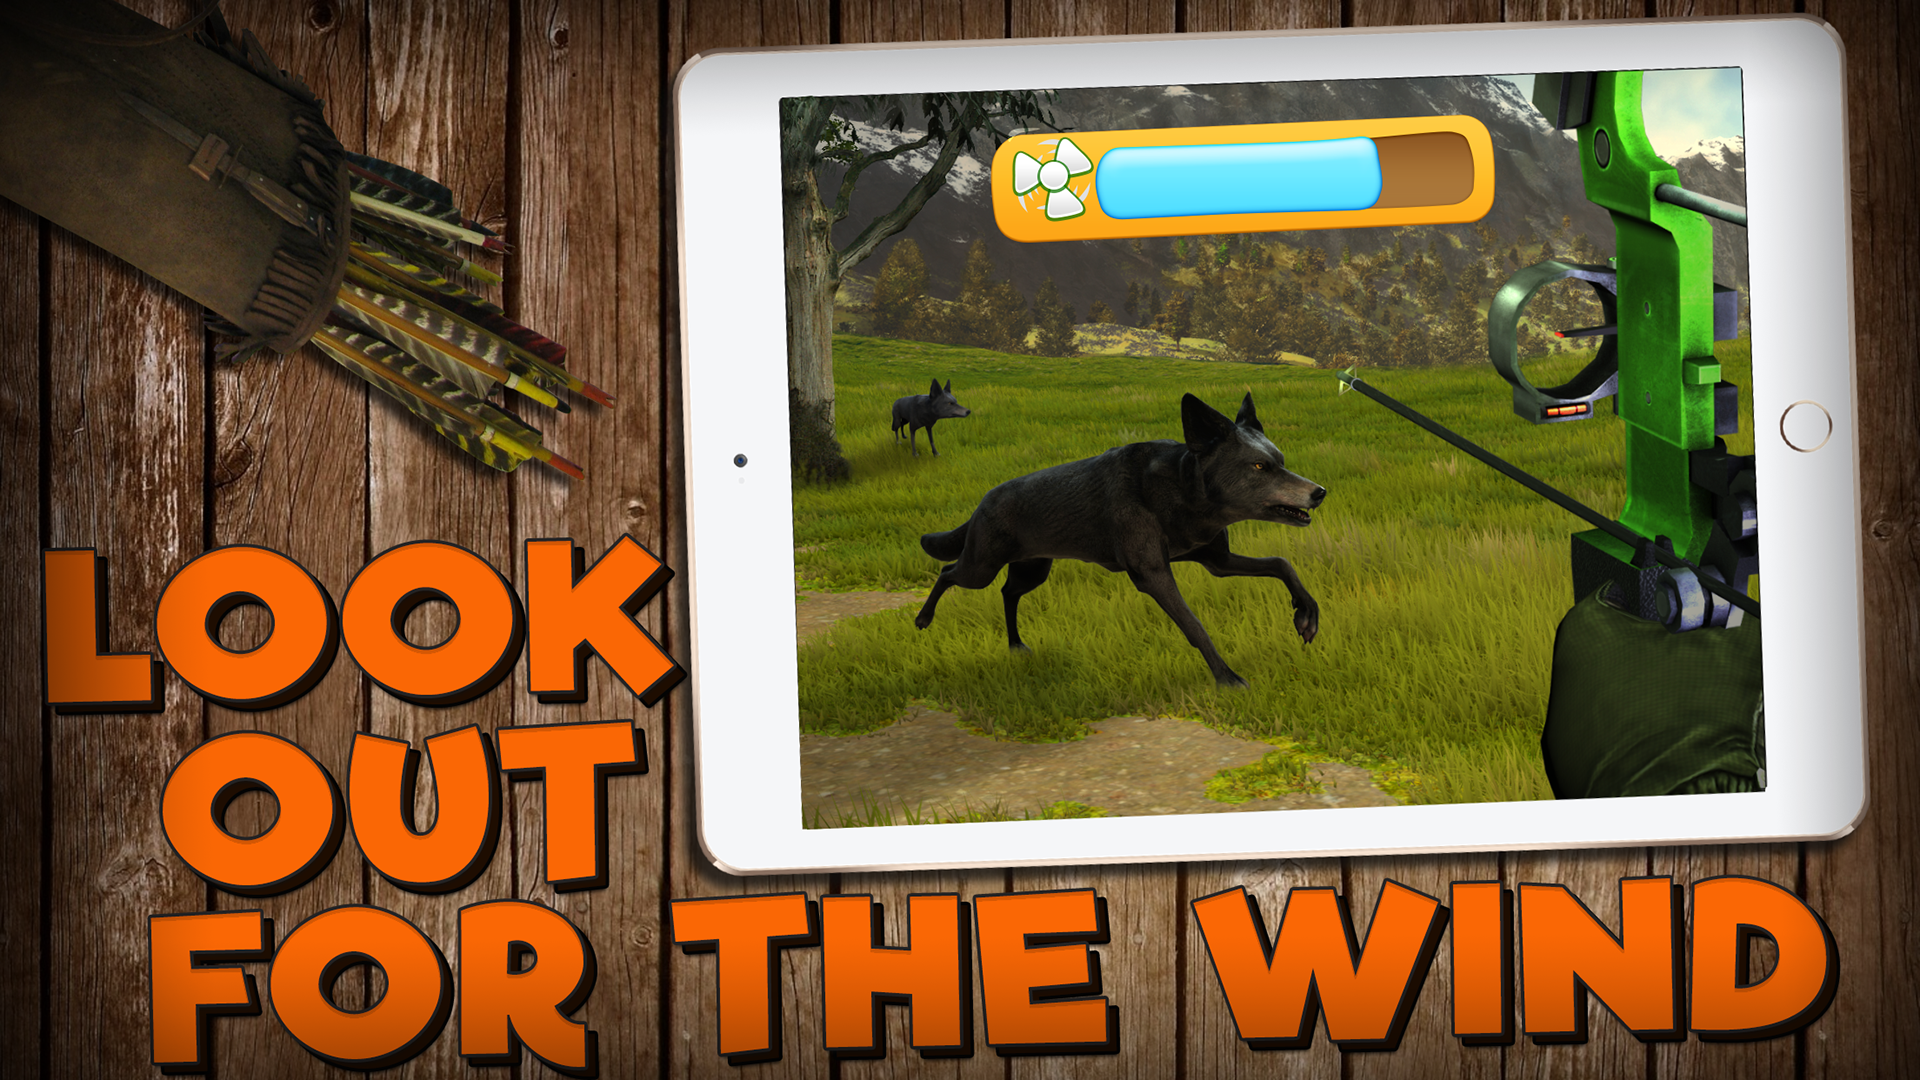 Android application Europe: Bow Hunt Wild Animals screenshort